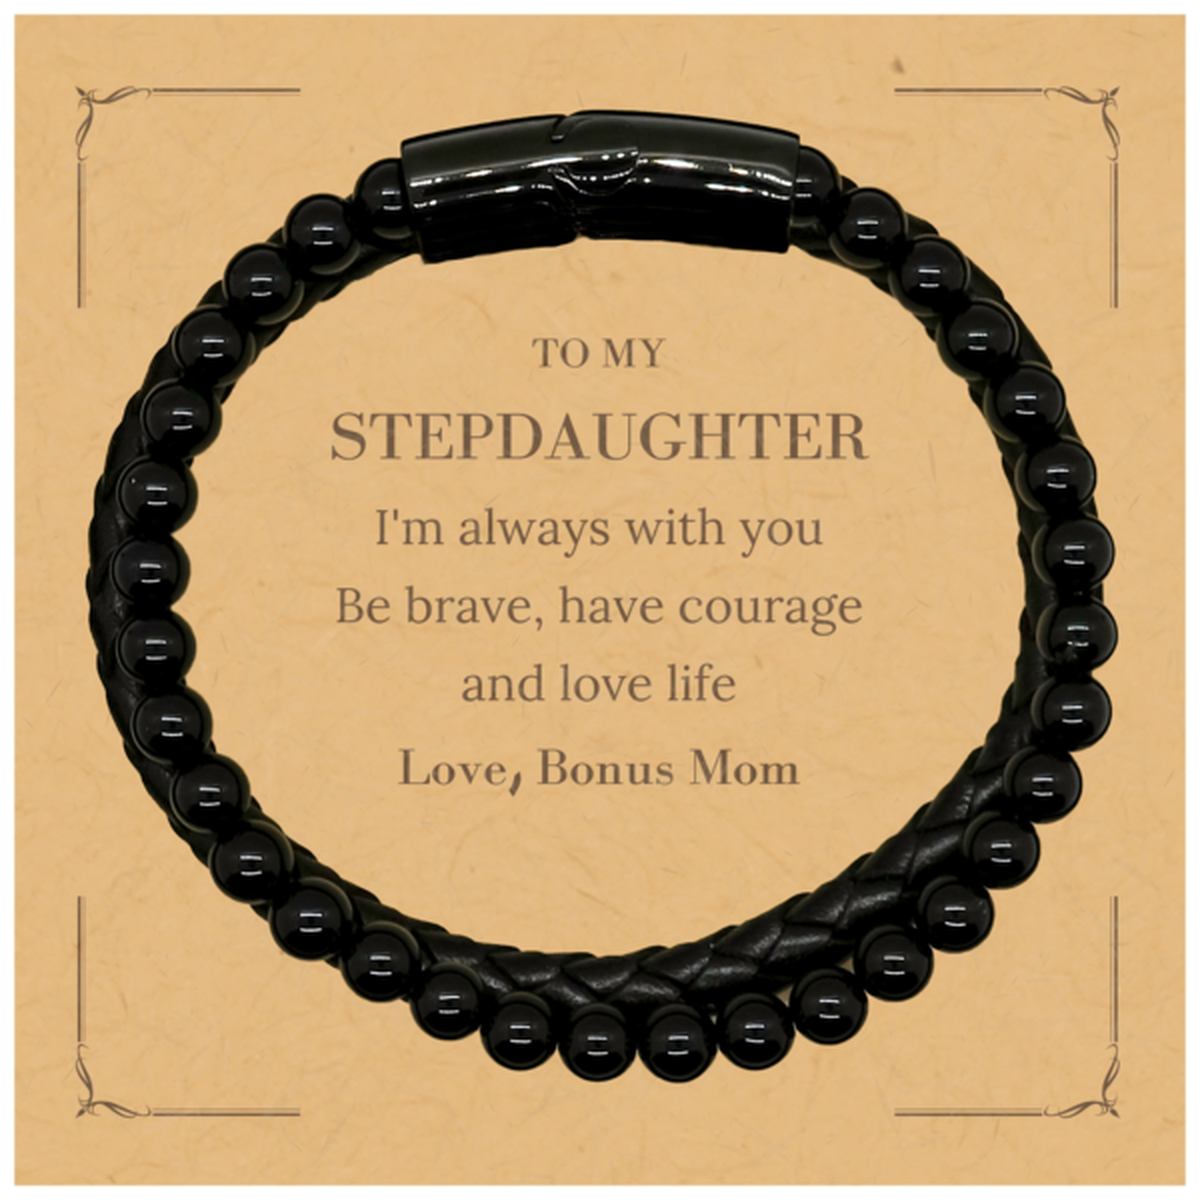 To My Stepdaughter Gifts from Bonus Mom, Unique Stone Leather Bracelets Inspirational Christmas Birthday Graduation Gifts for Stepdaughter I'm always with you. Be brave, have courage and love life. Love, Bonus Mom